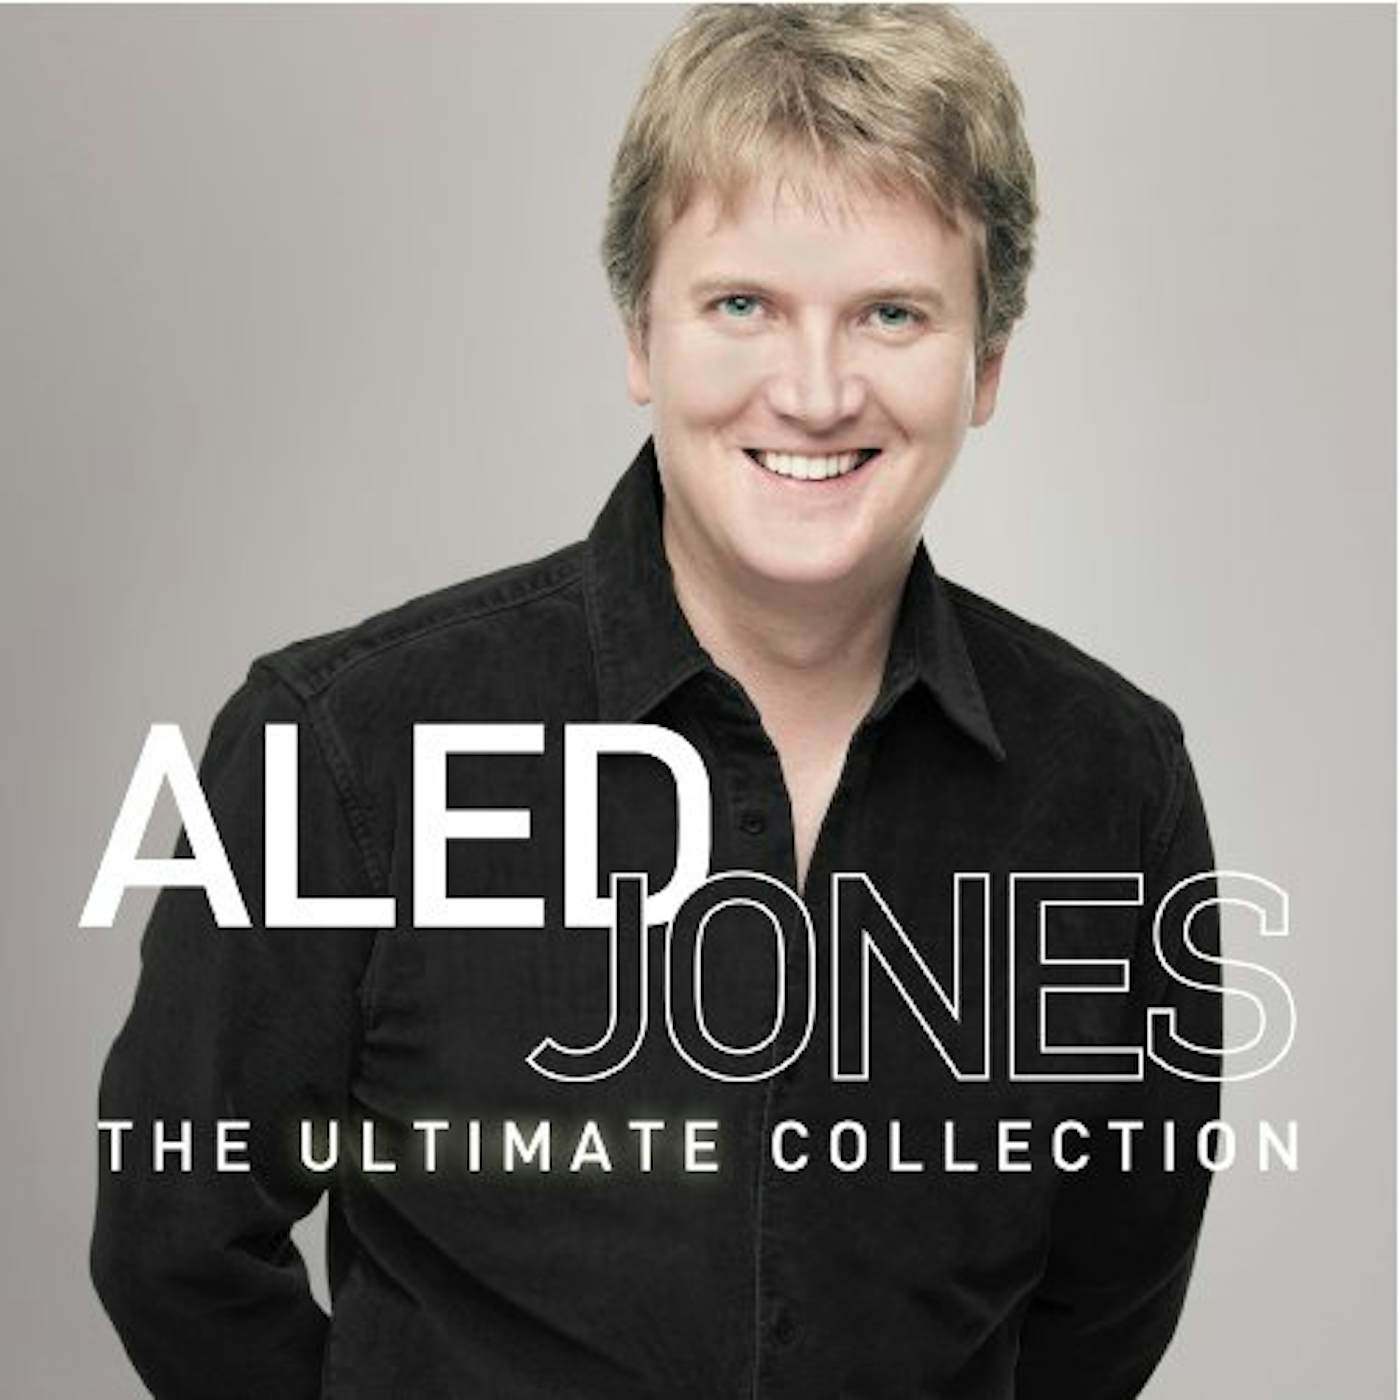 Aled Jones ULTIMATE COLLECTION CD